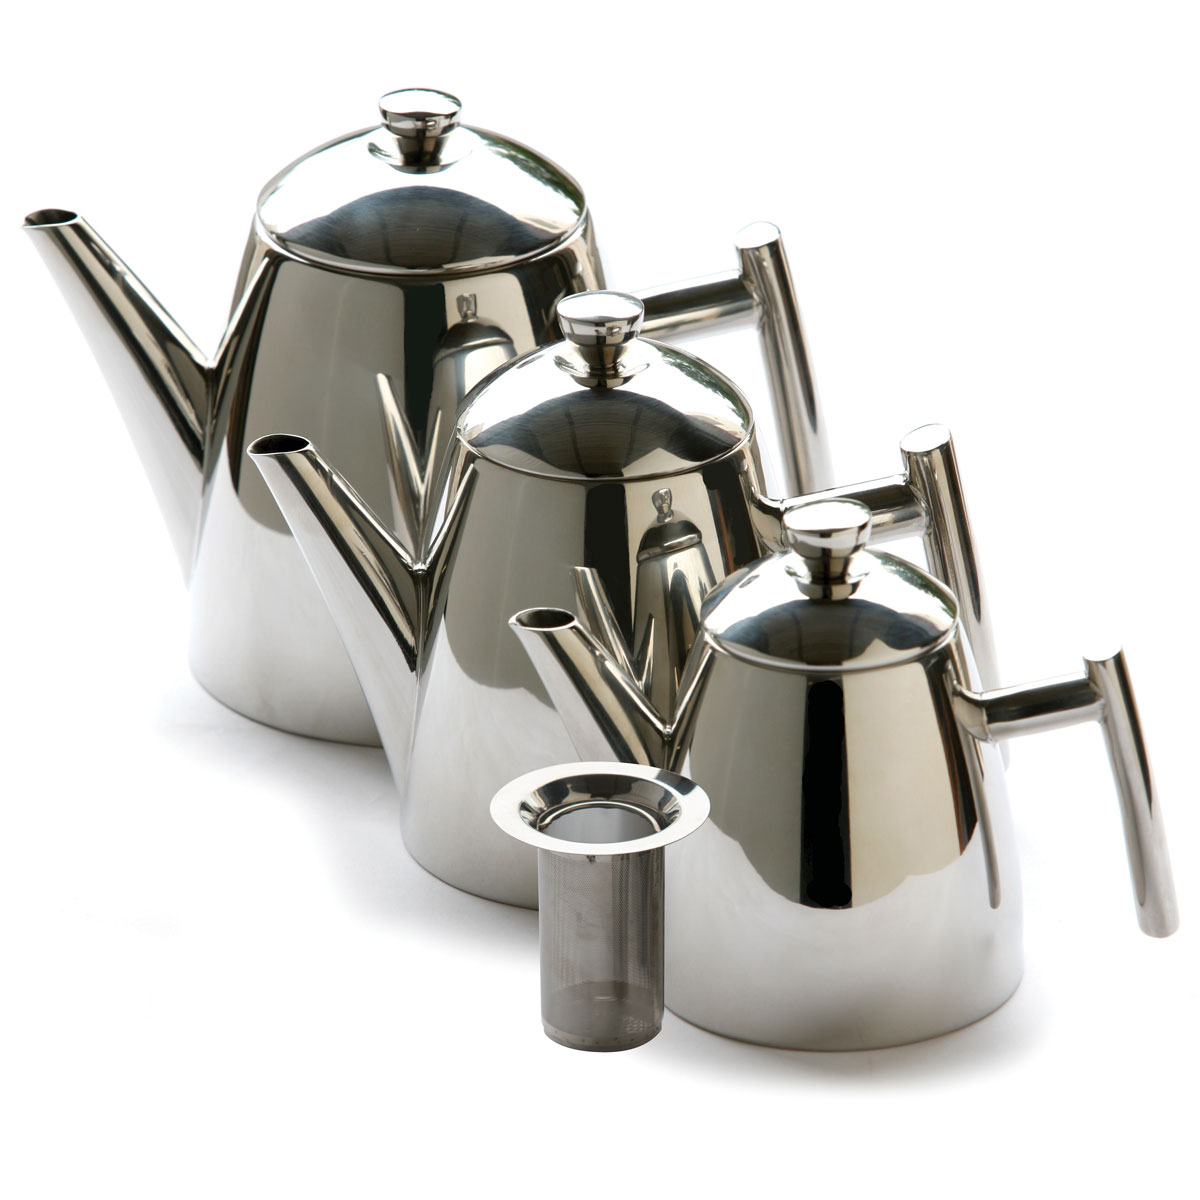 Frieling USA 18/8 Stainless Steel Primo Teapot with Infuser 14-ounce 